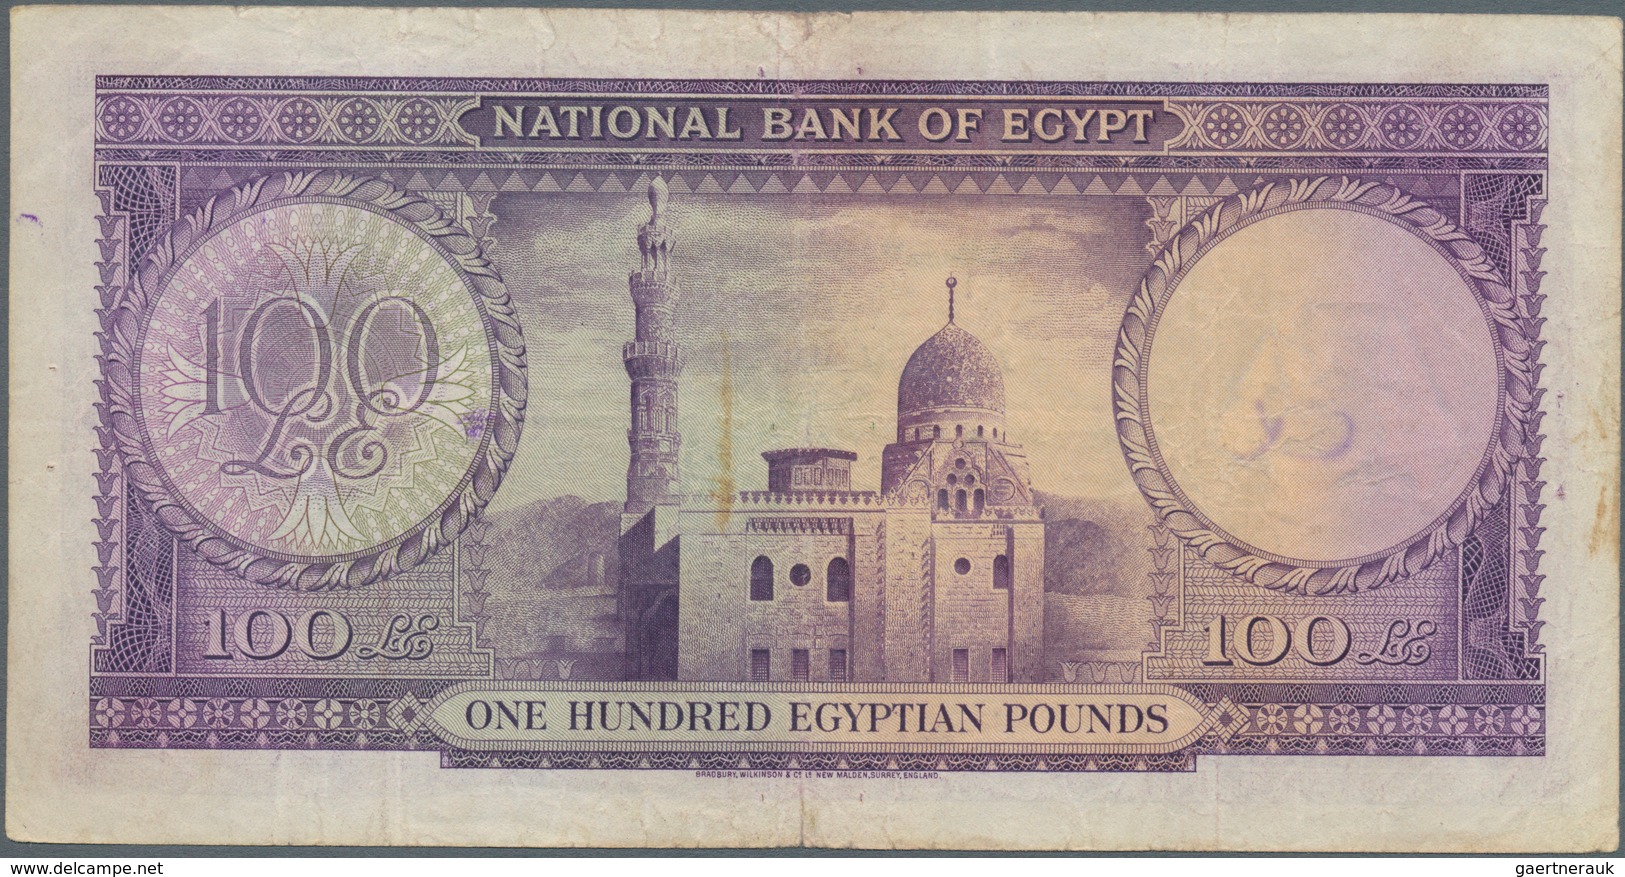 01396 Egypt / Ägypten: 100 Pounds 1951 P. 27b, Used With Folds And Creases, A Small Pen Writing At Left, P - Egypt